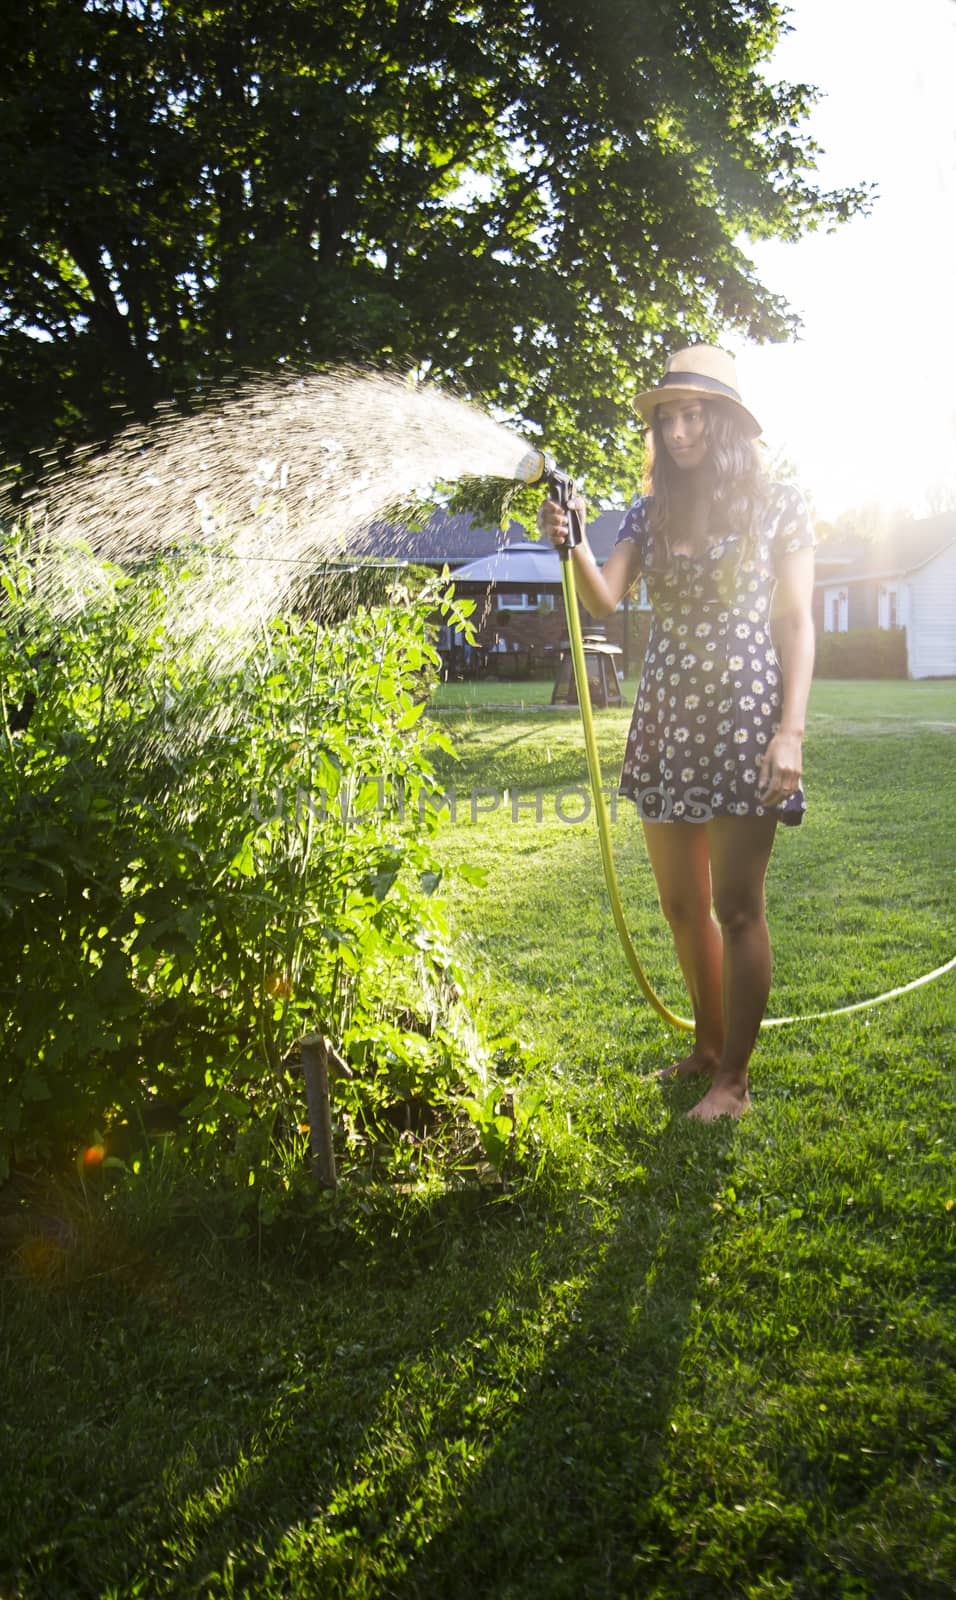 twenty something woman standing outside in the sun, wearing a sun dress and a straw hat, watering a tomato plant in a garden